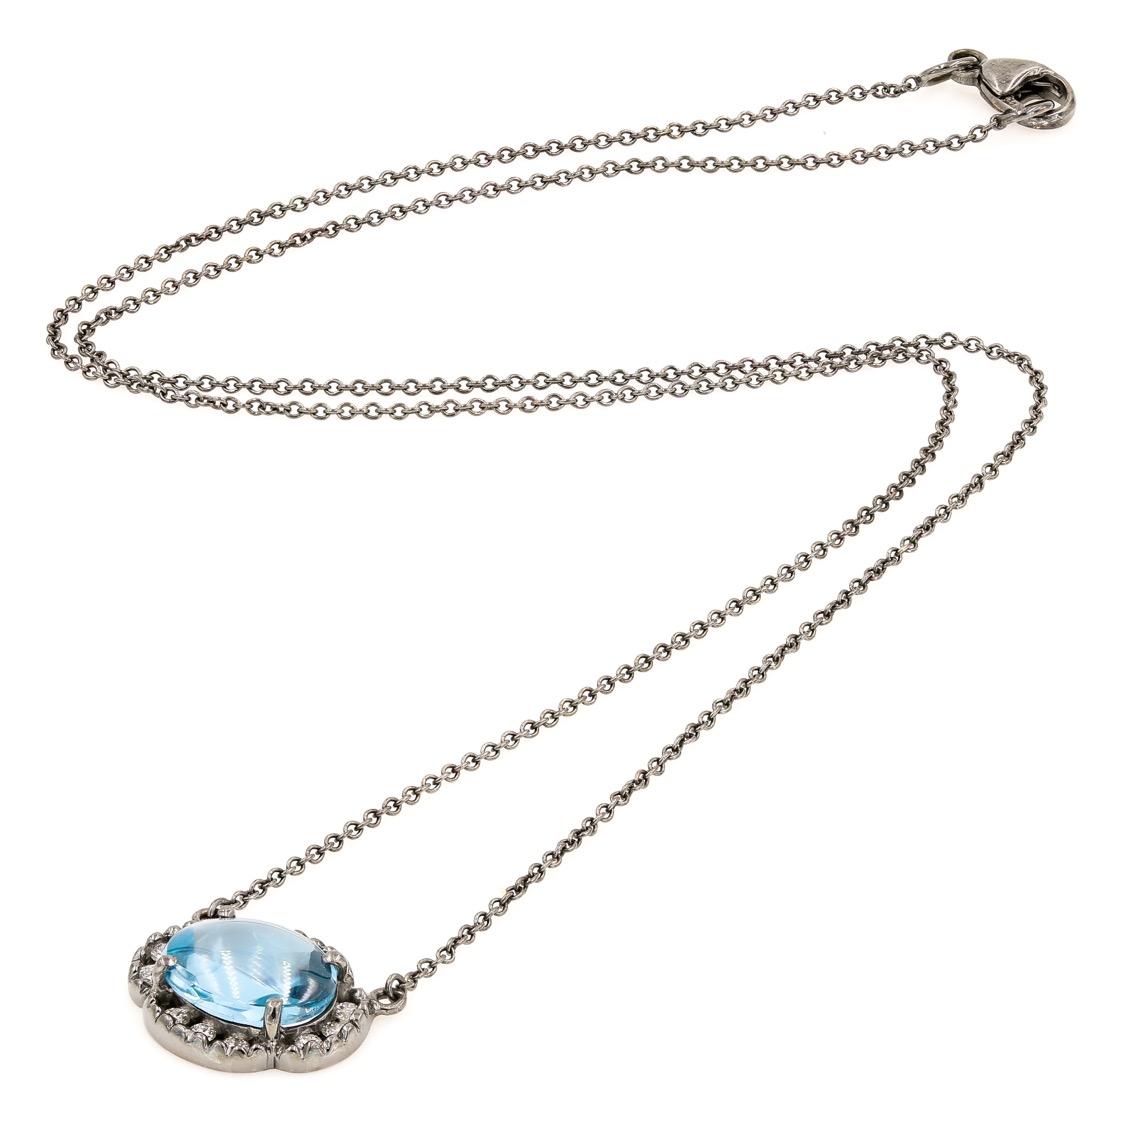 Oval Cut Cabochon Blue Topaz and Round Diamond Necklace 1